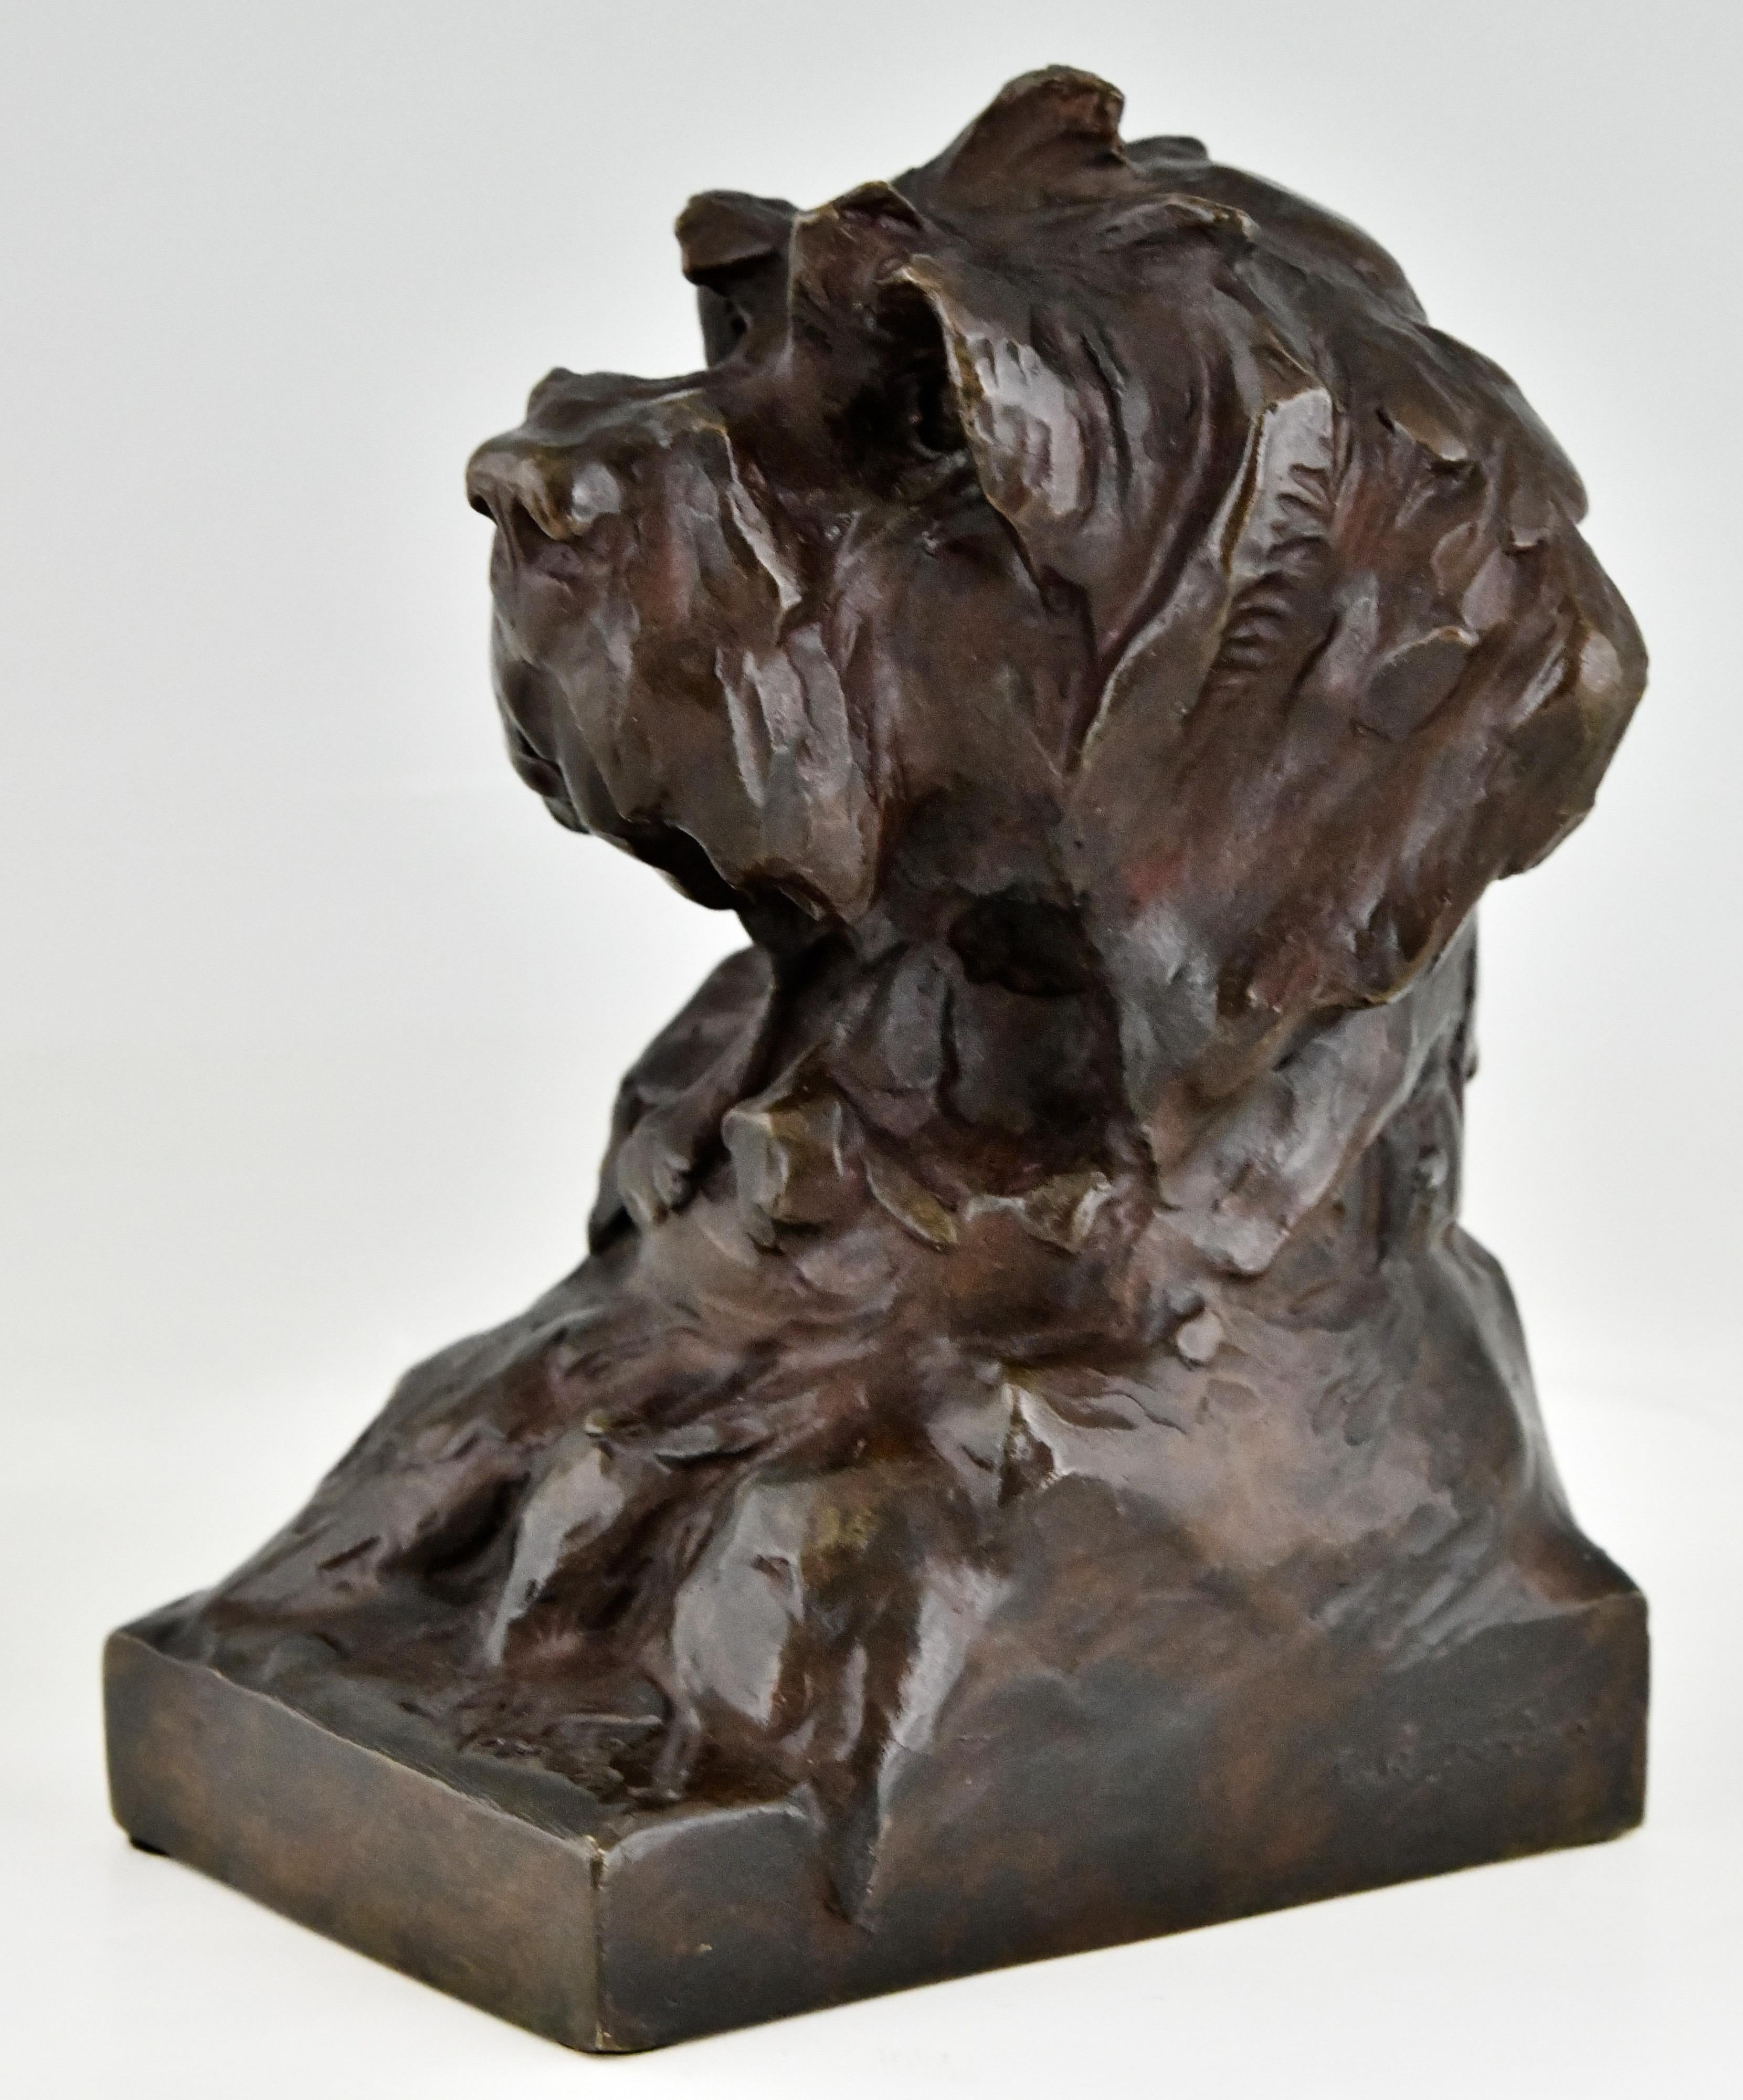 Art Deco Bronze Sculpture Terrier Dog Bookends by L. Fiot, Susse Frères Foundry 1